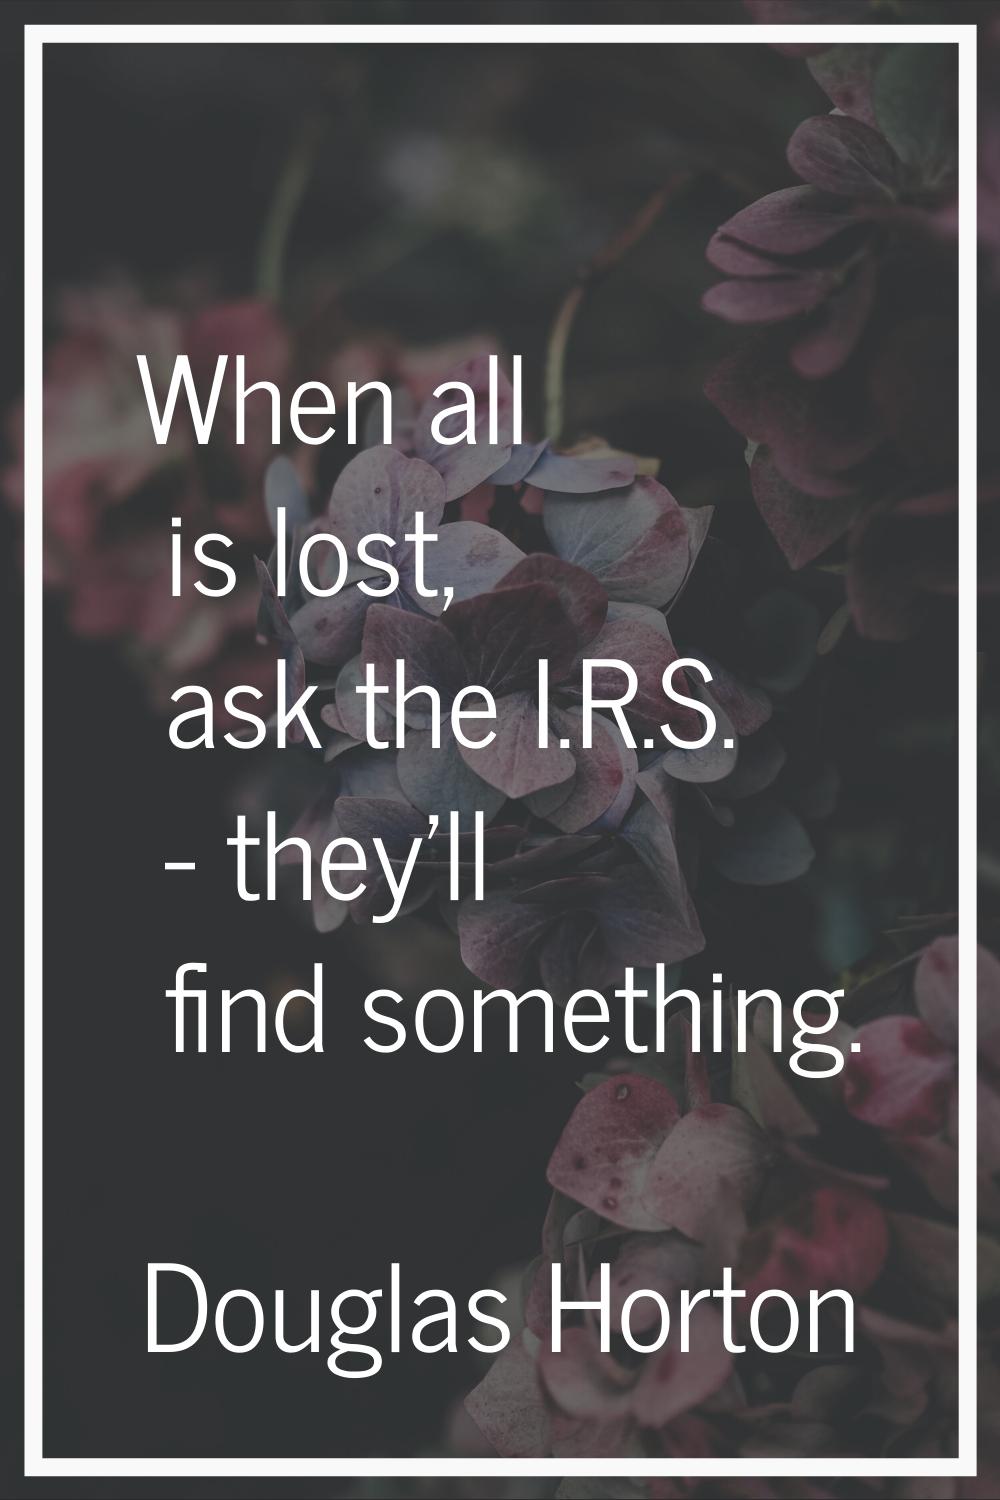 When all is lost, ask the I.R.S. - they'll find something.